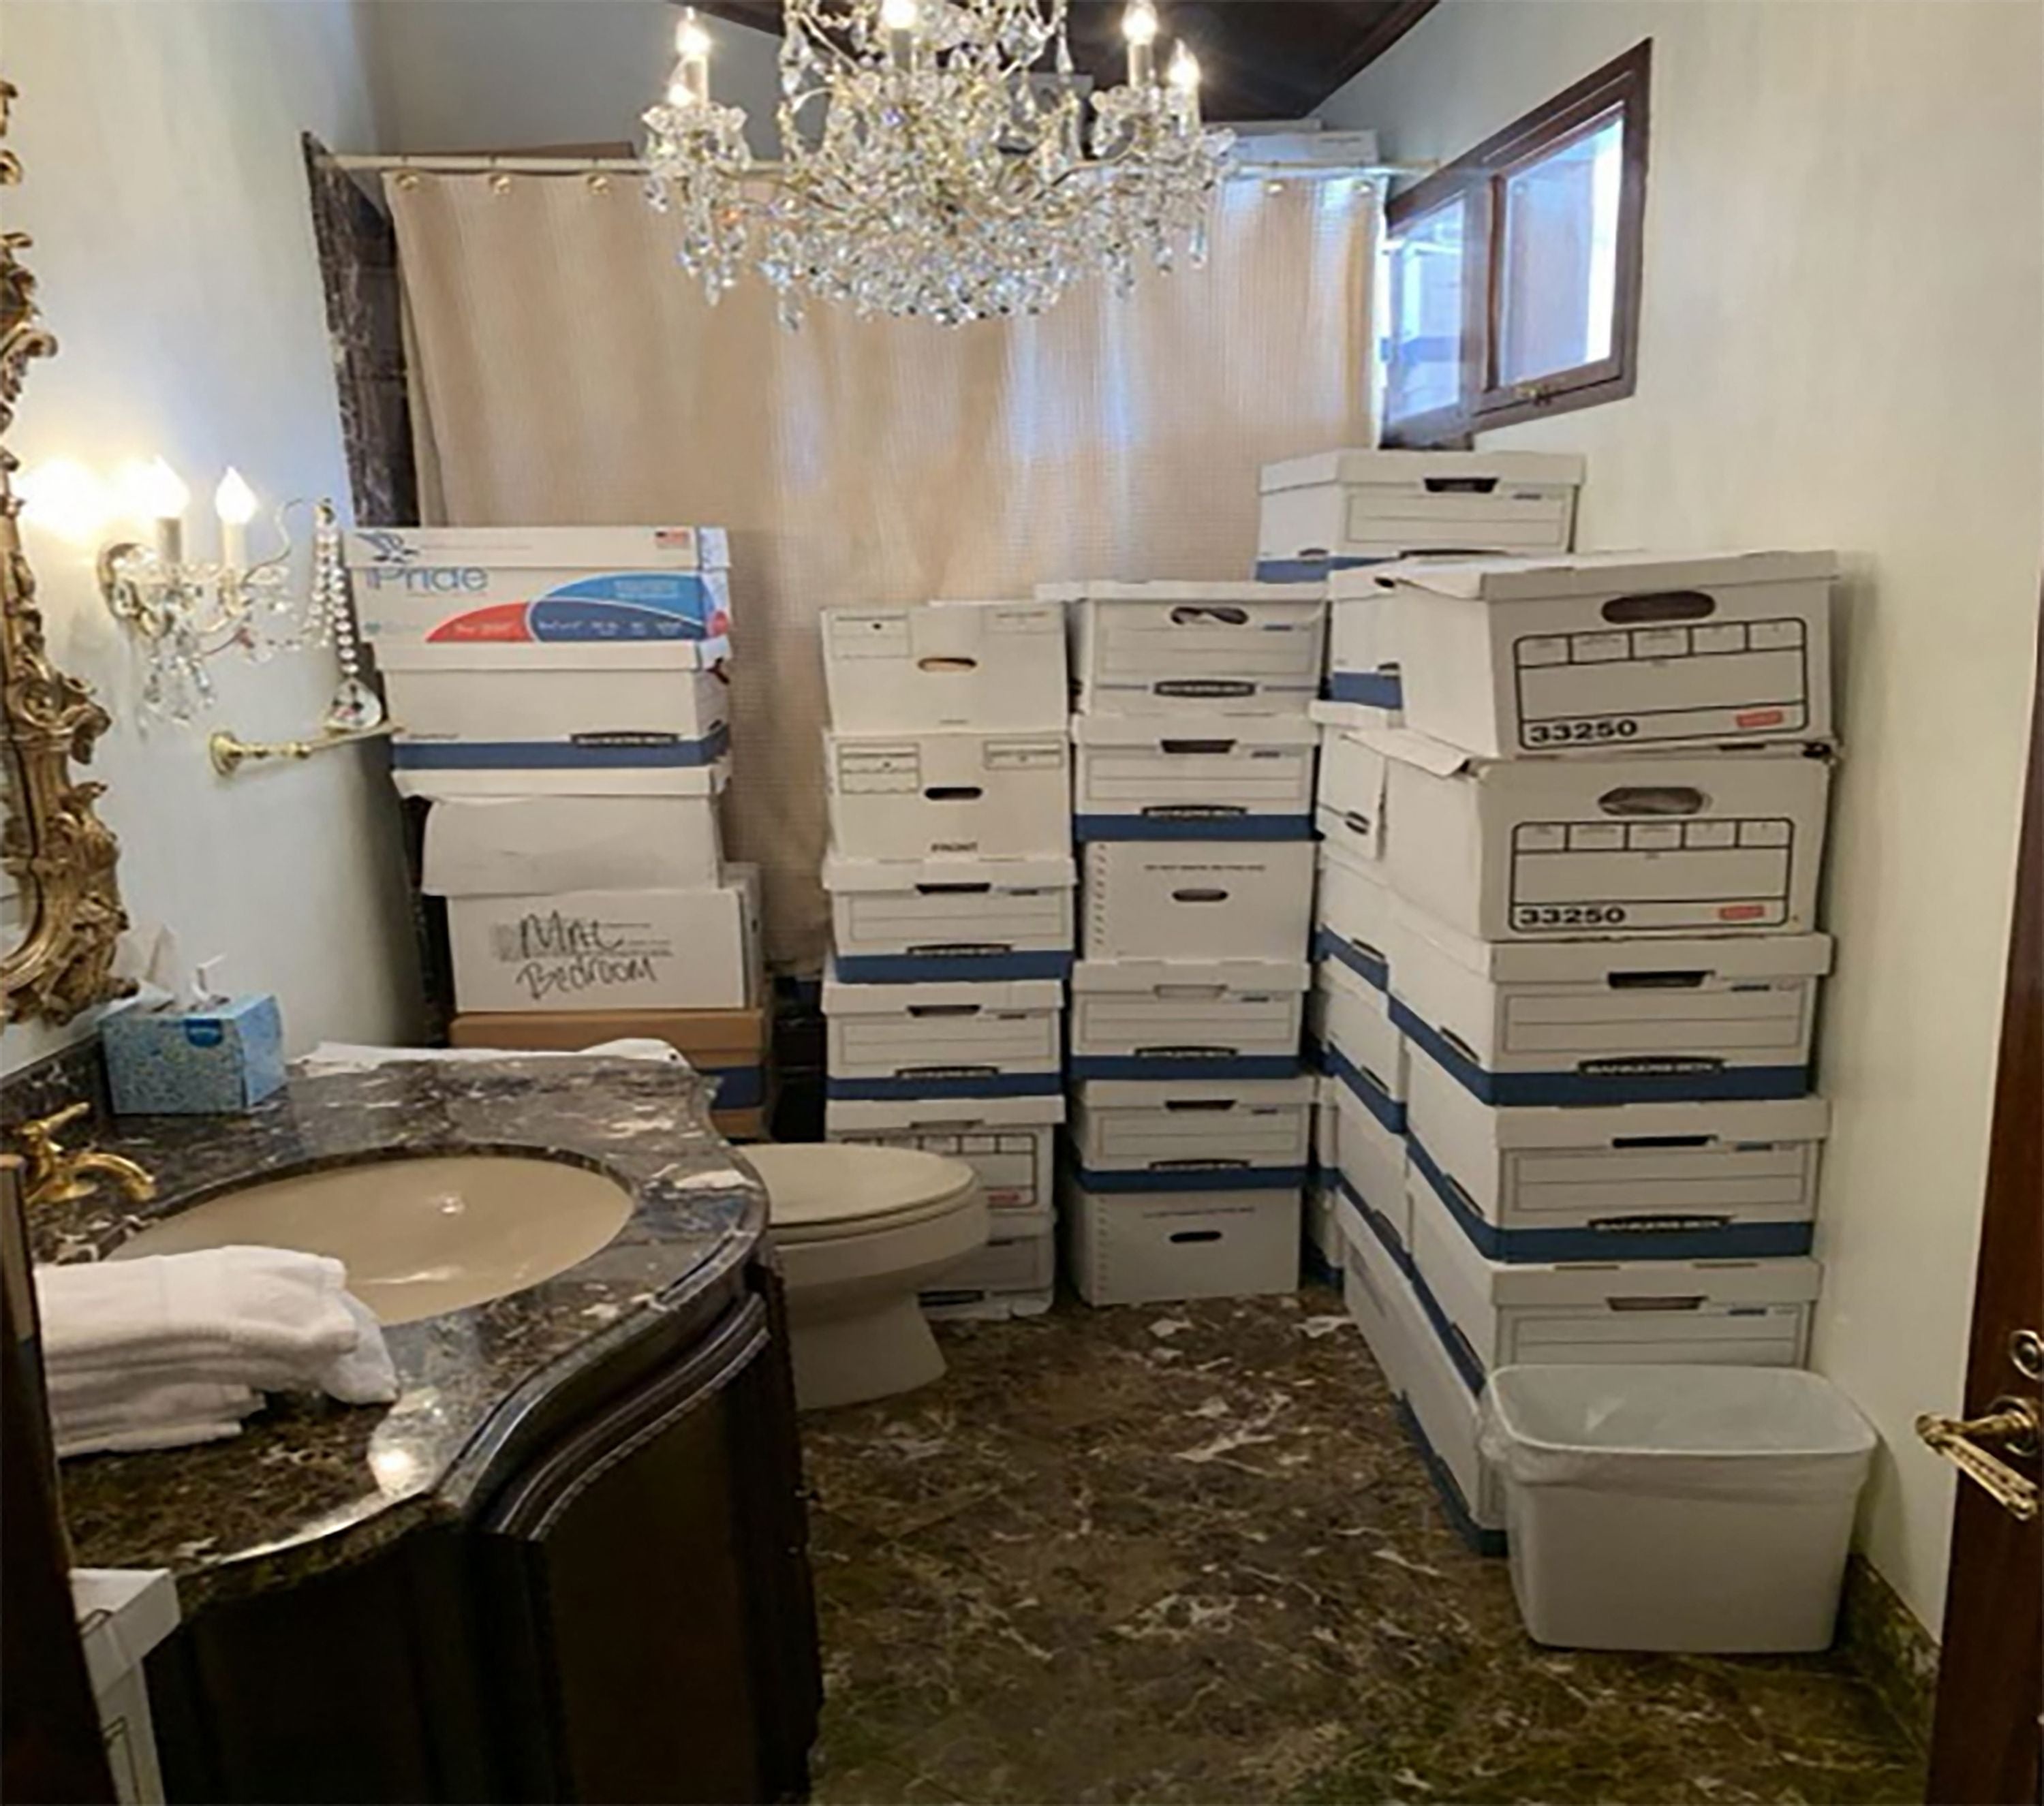 Stacks of boxes in a bathroom and shower at Donald Trump’s Mar-a-Lago estate in Palm Beach, Florida